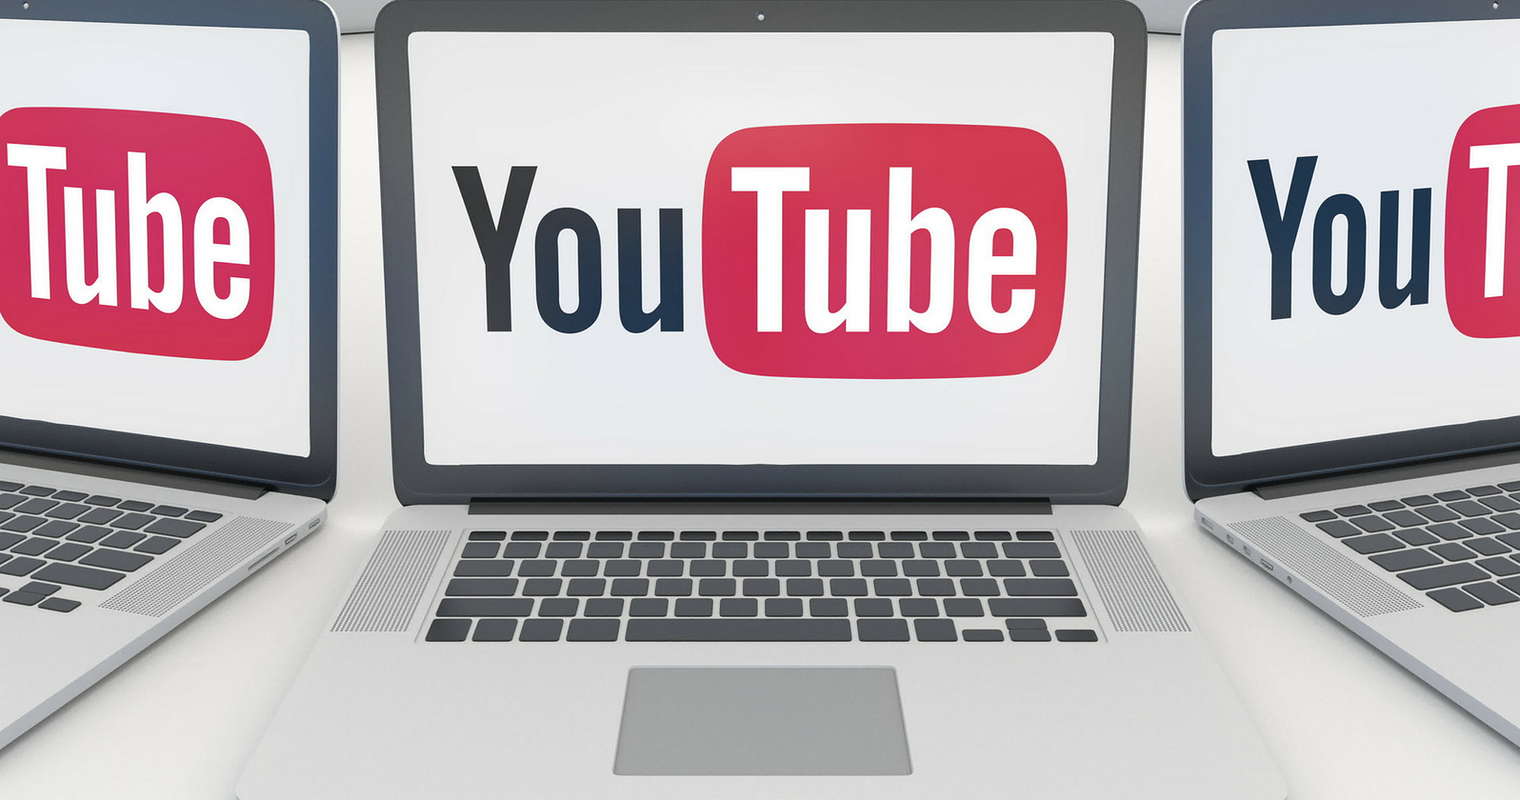 YouTube Channels With Under 10K Views Can No Longer Display Ads